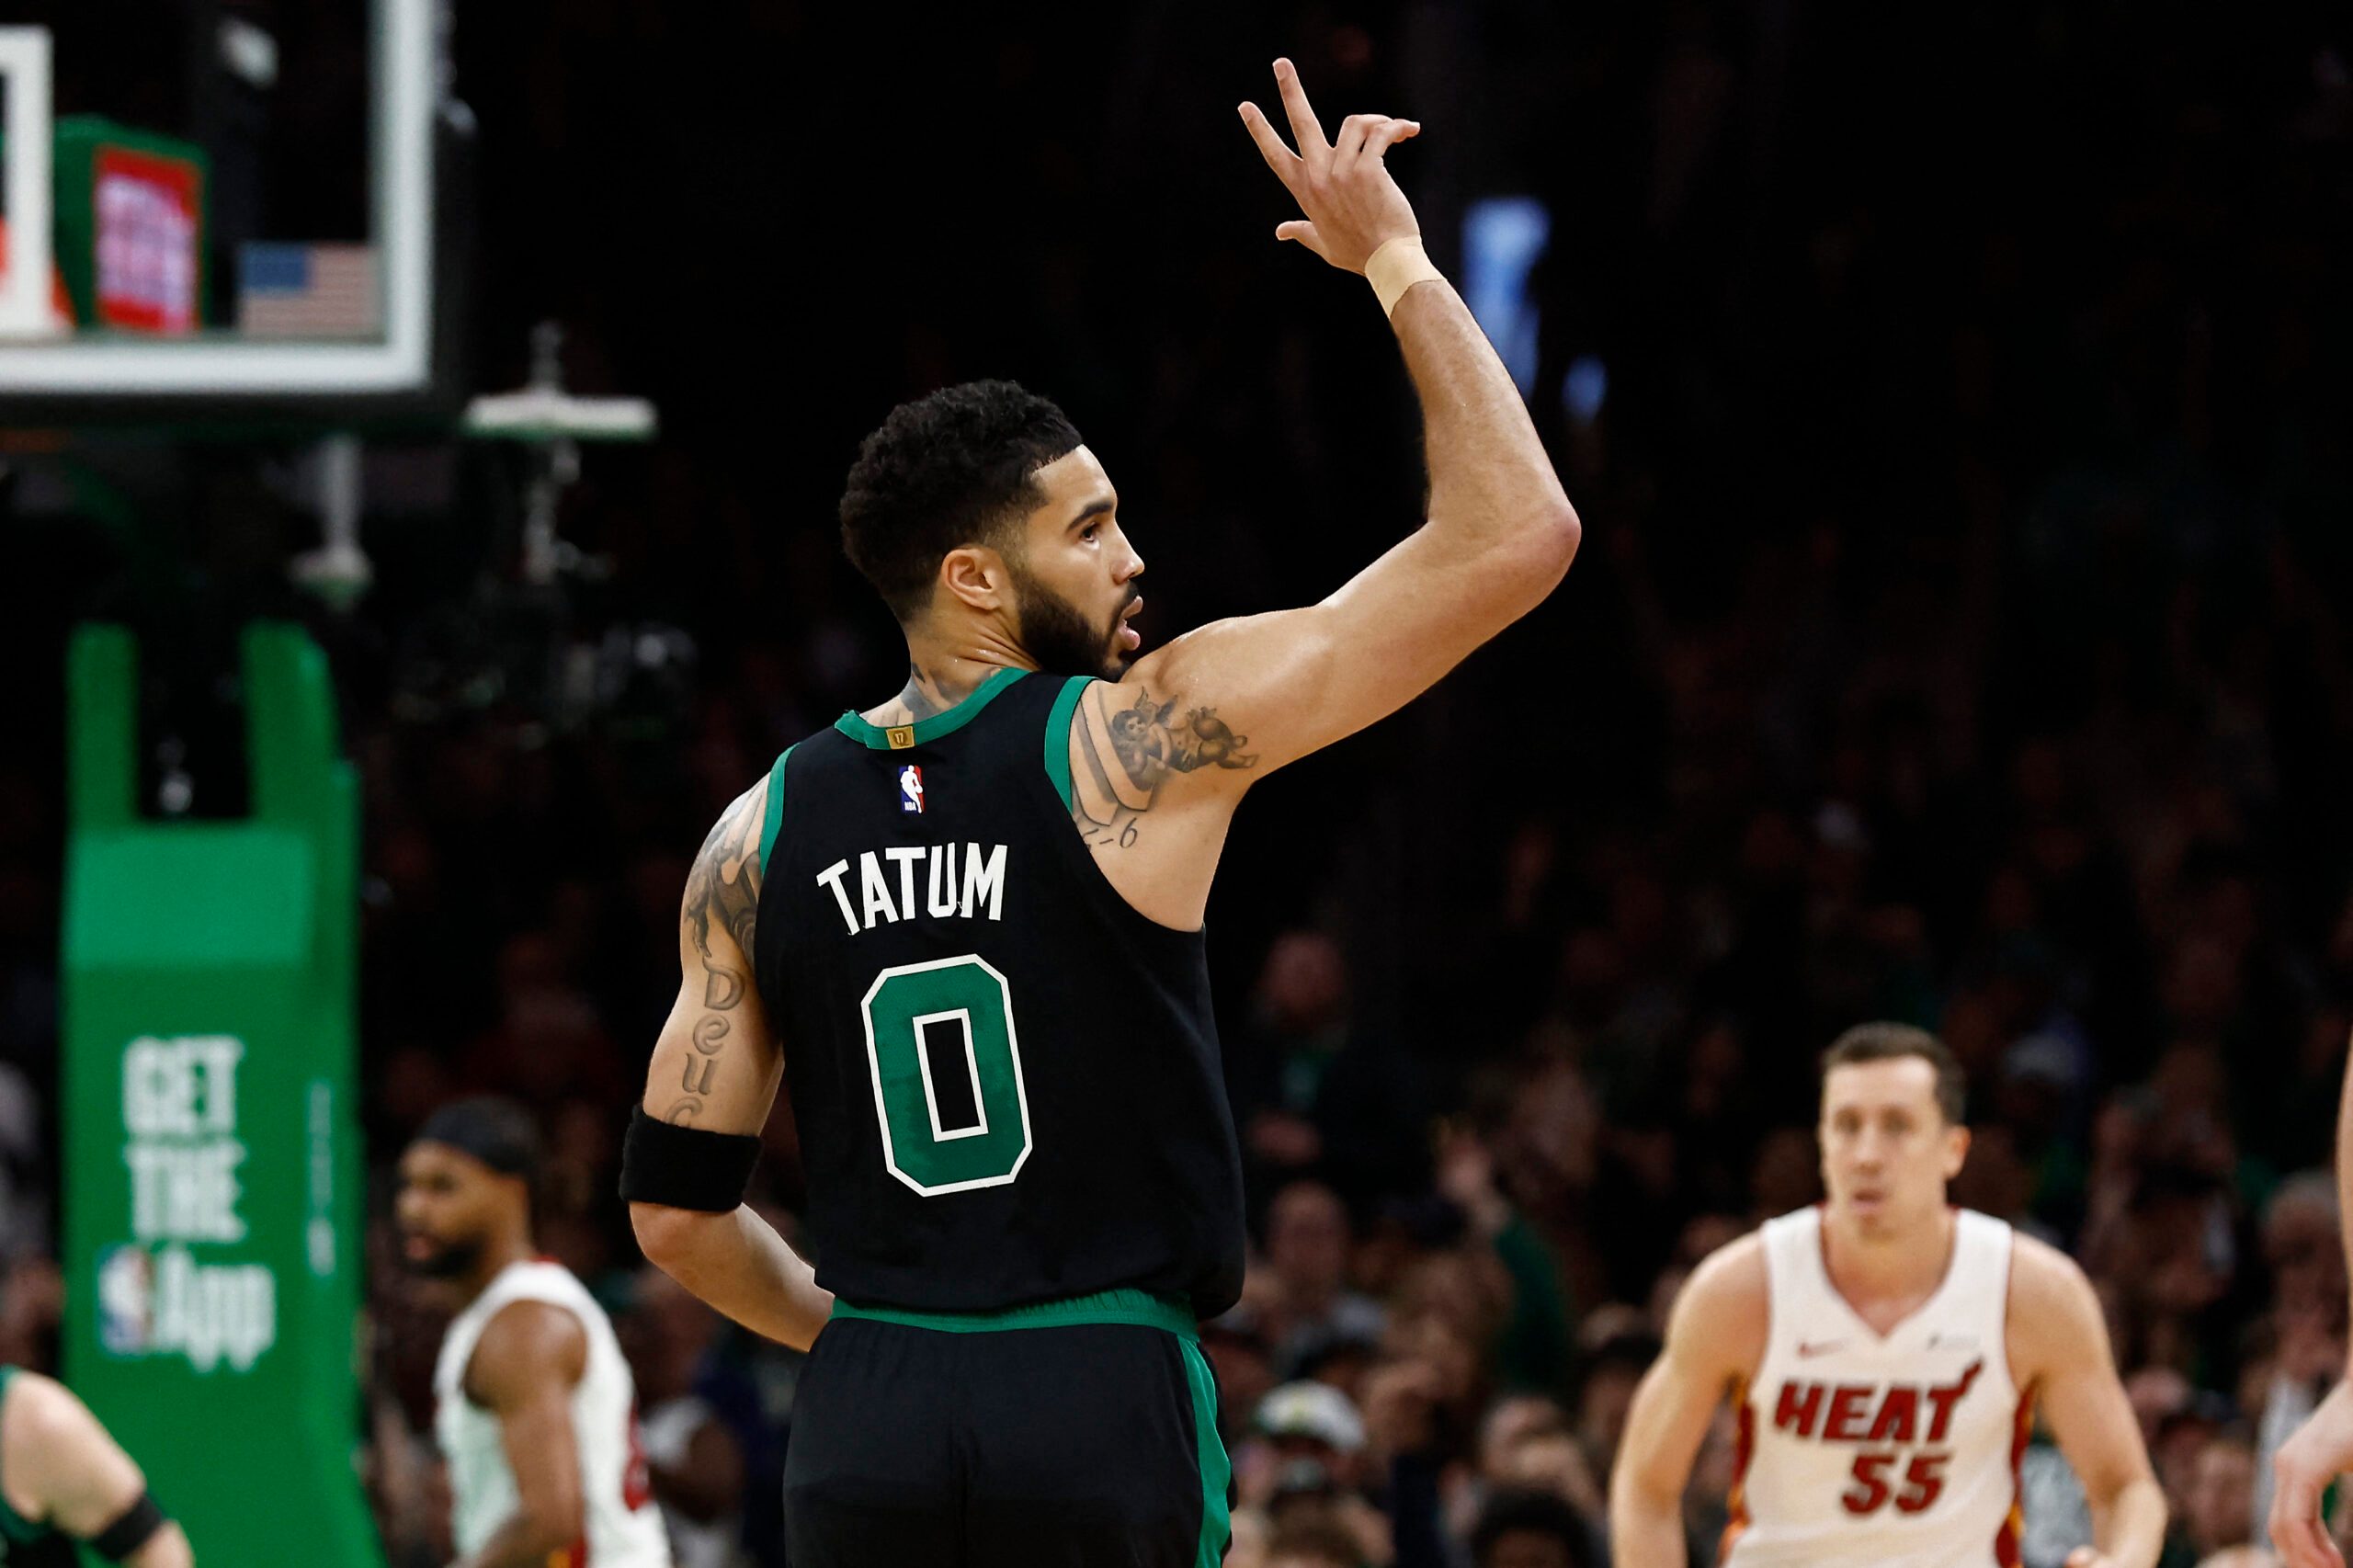 Too hot: Celtics advance with Game 5 blowout of Heat